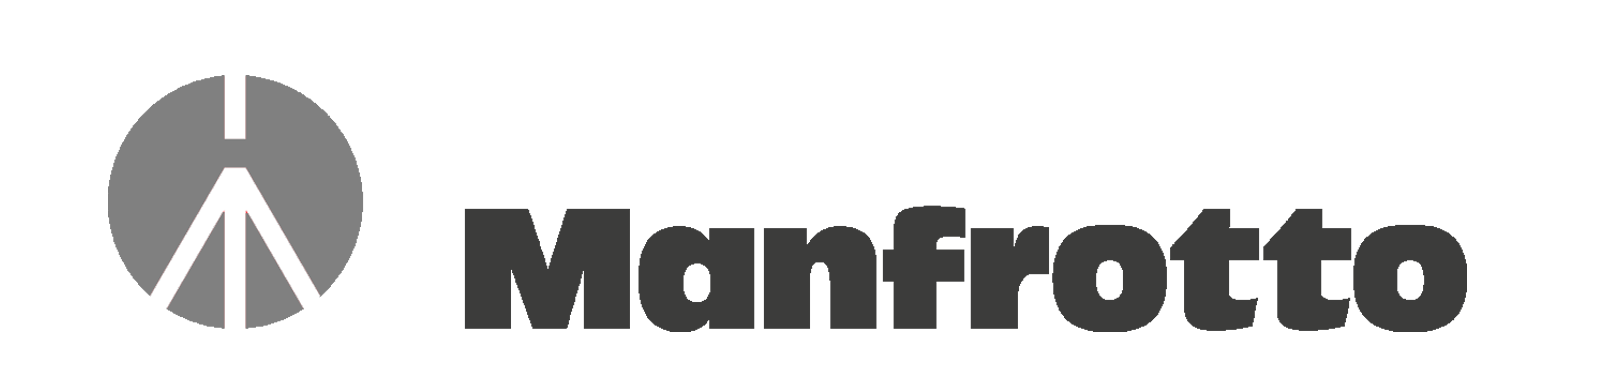 Manfrotto-Logo-3.png